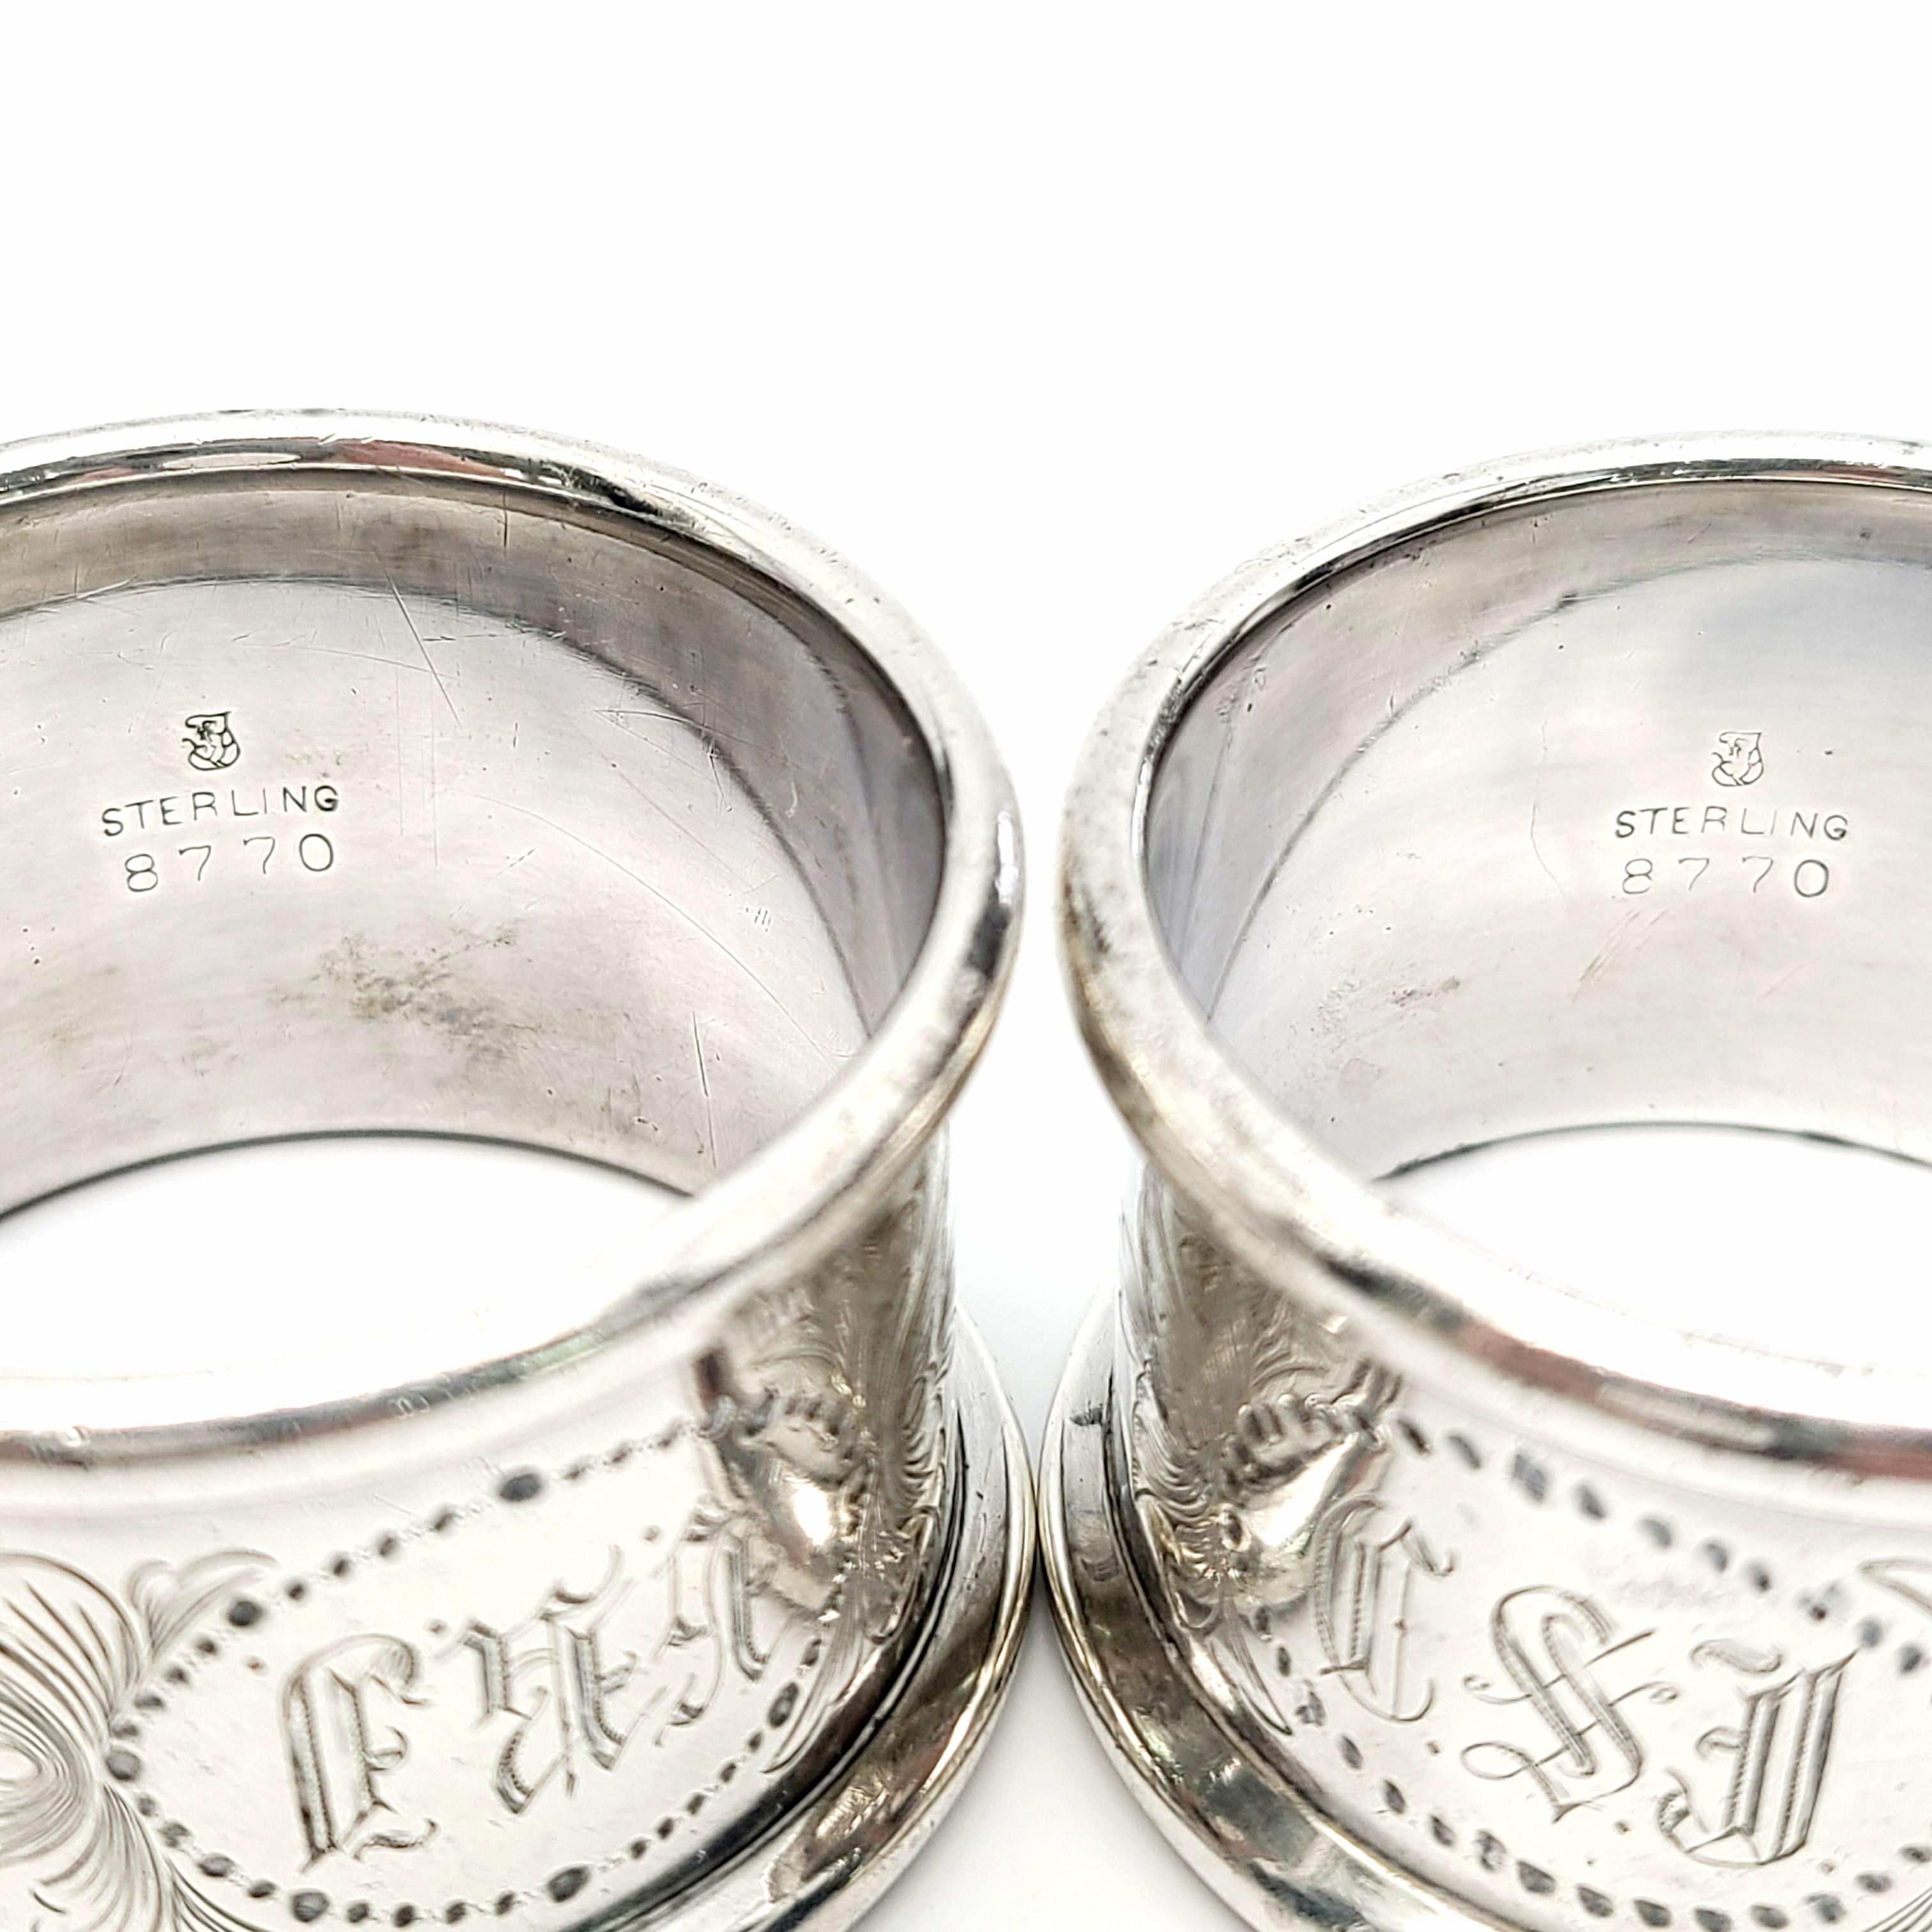 Set of 2 Towle Sterling Silver Napkin Rings 8770 For Sale 6